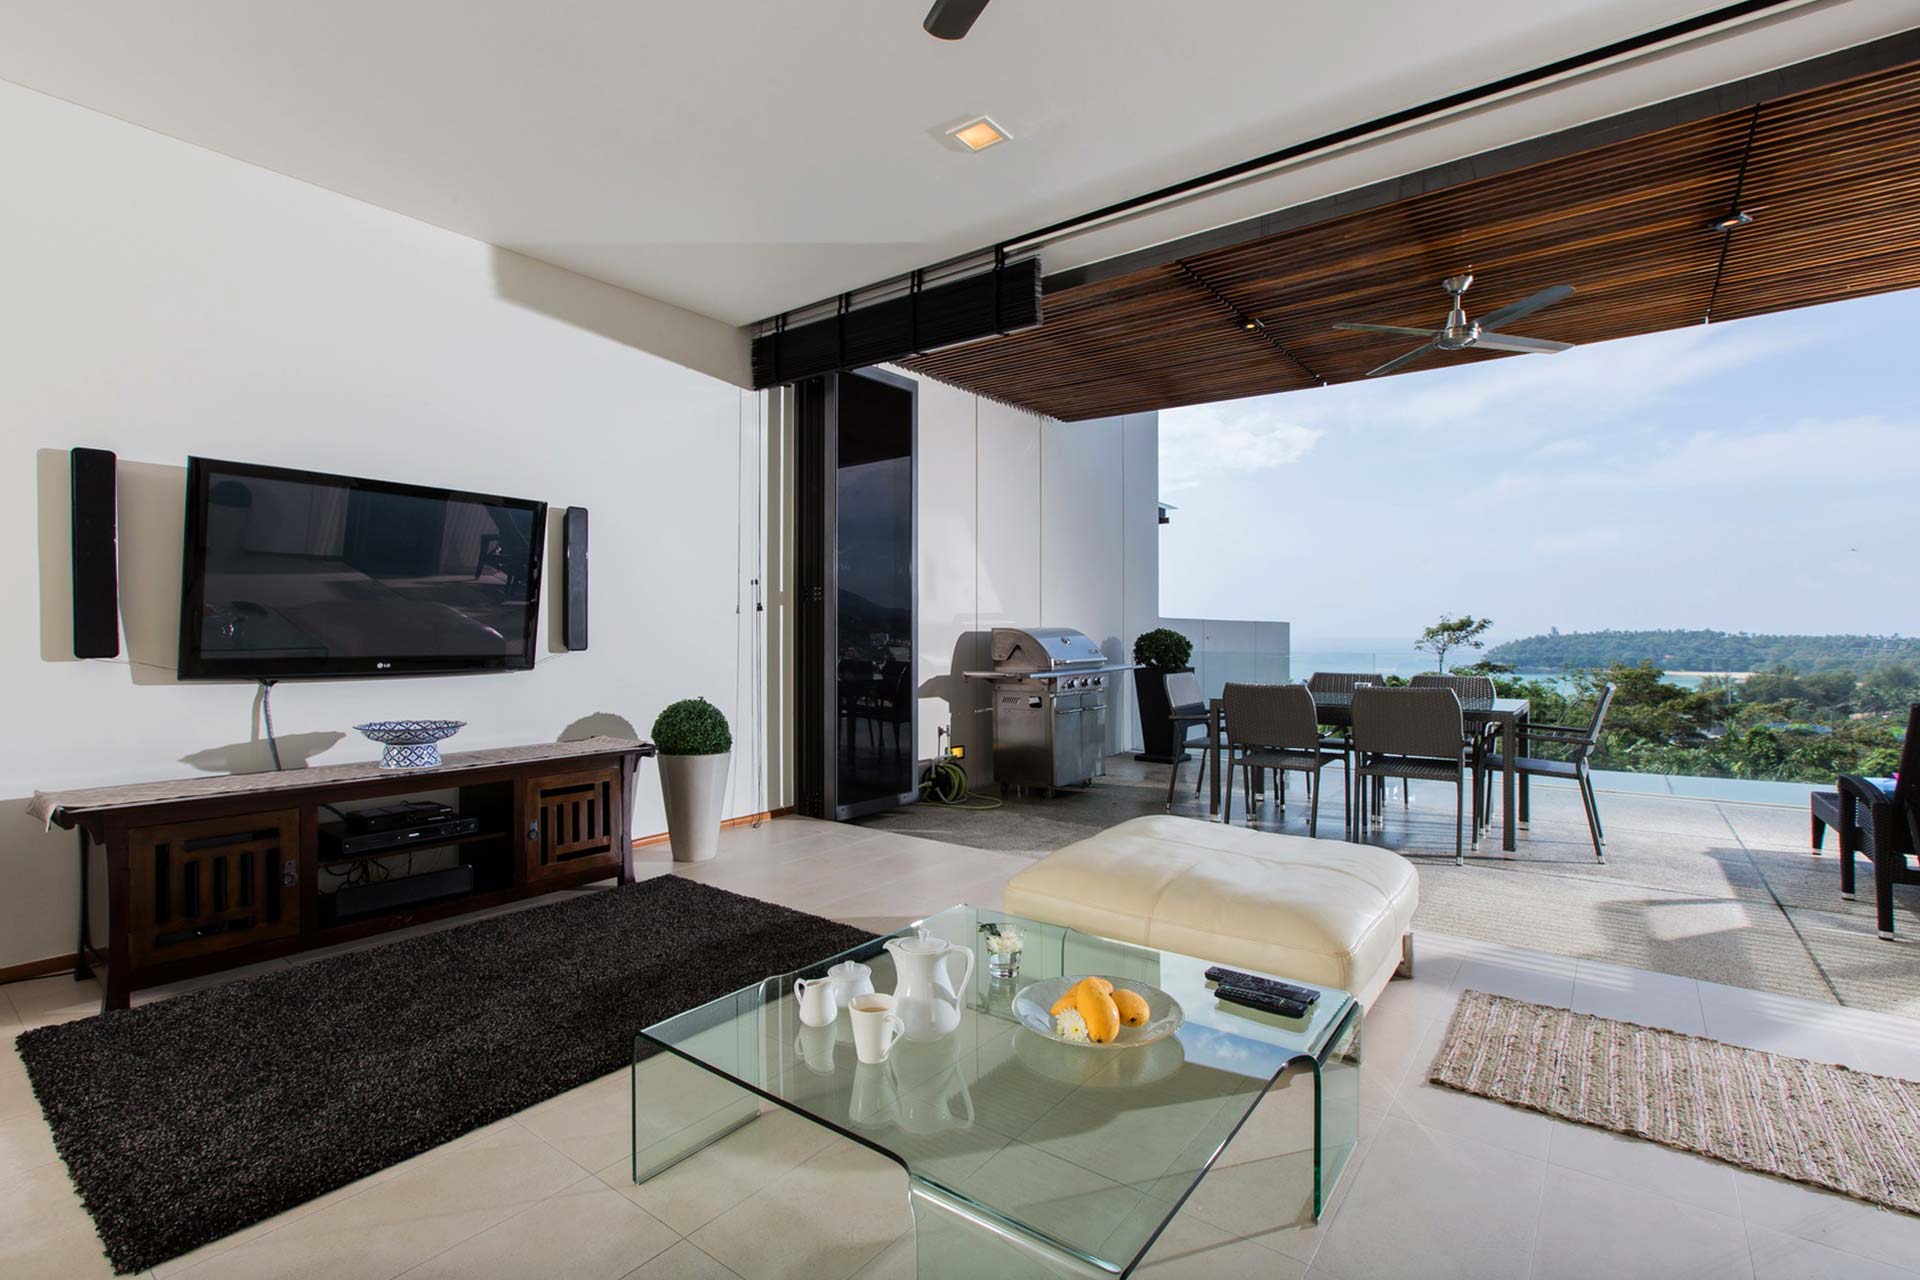 The Heights Phuket Property - Type C Apartments